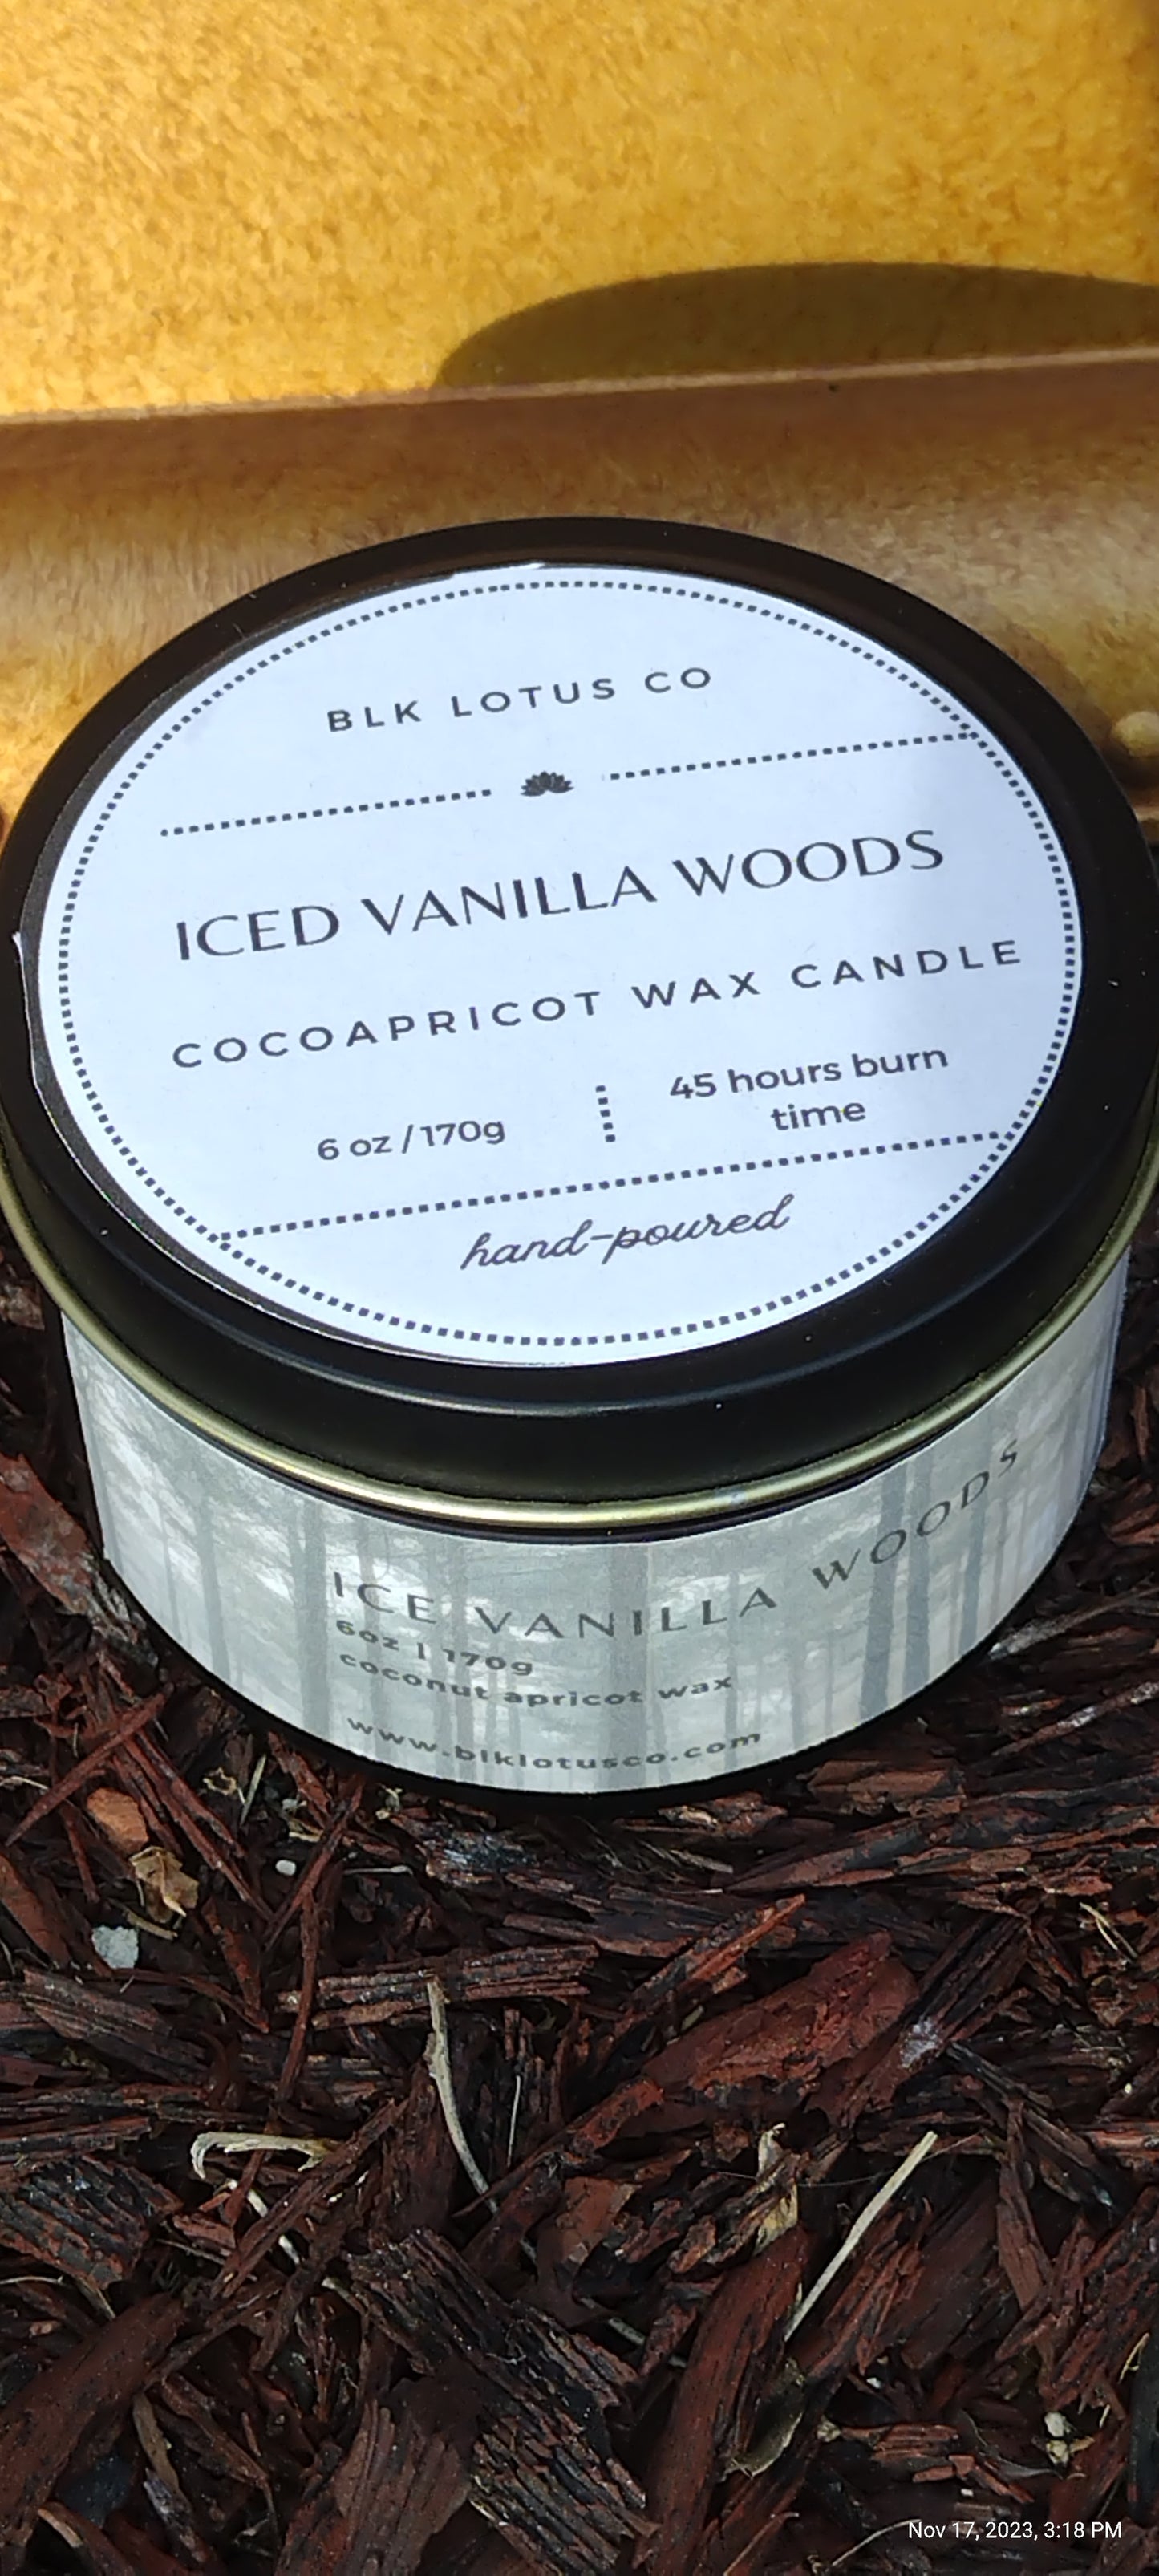 Embrace Cozy Vibes: 6 oz Black Tin Sweater Weather Coco Apricot Wax Candle with Wooden Wick